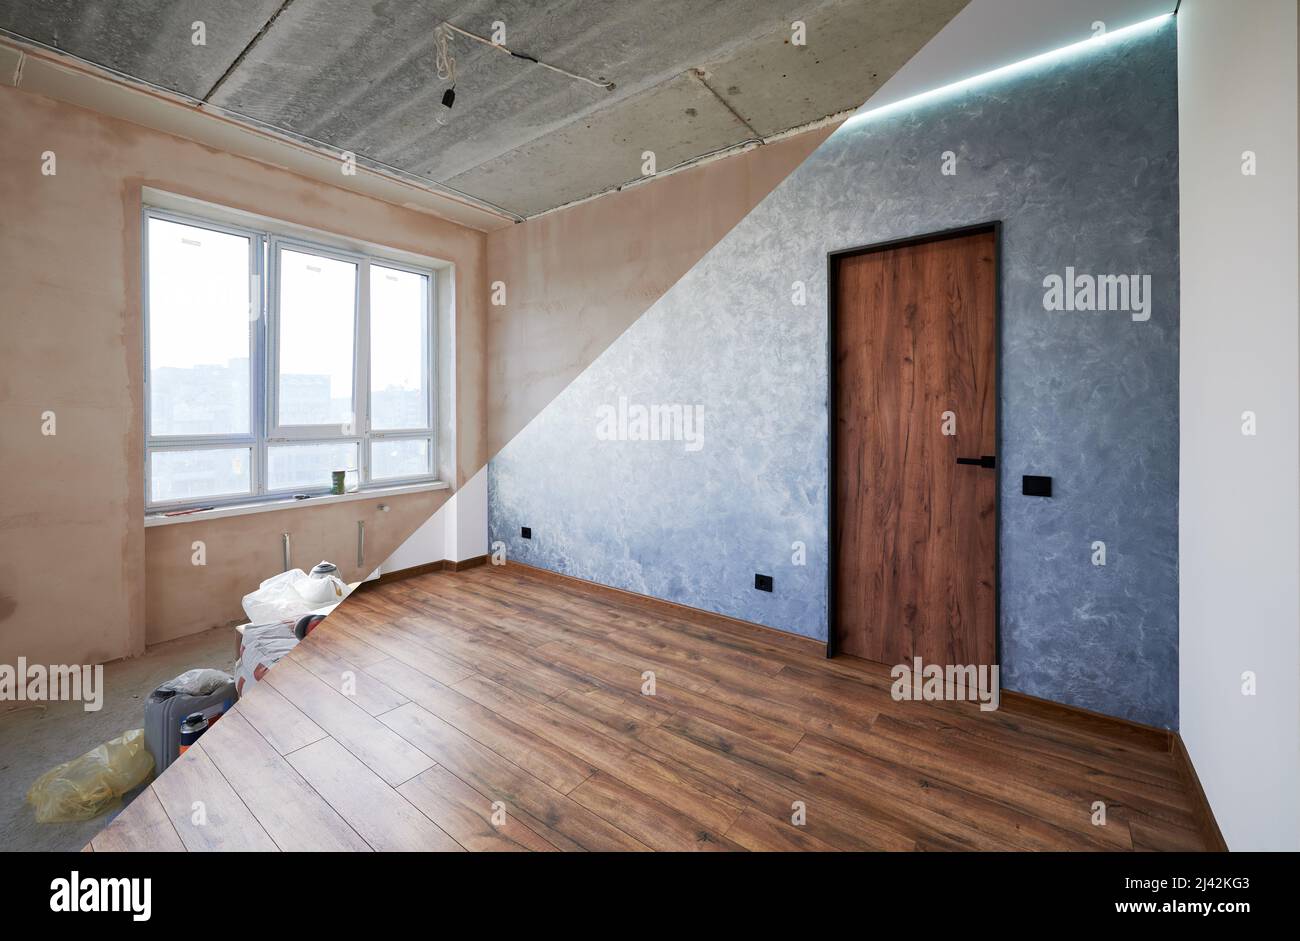 Interior room before and after renovation. Sad apartment has become modern and relevant room for comfortable stay. Two versions of room in one picture. Changes that lift the mood and add comfort. Stock Photo